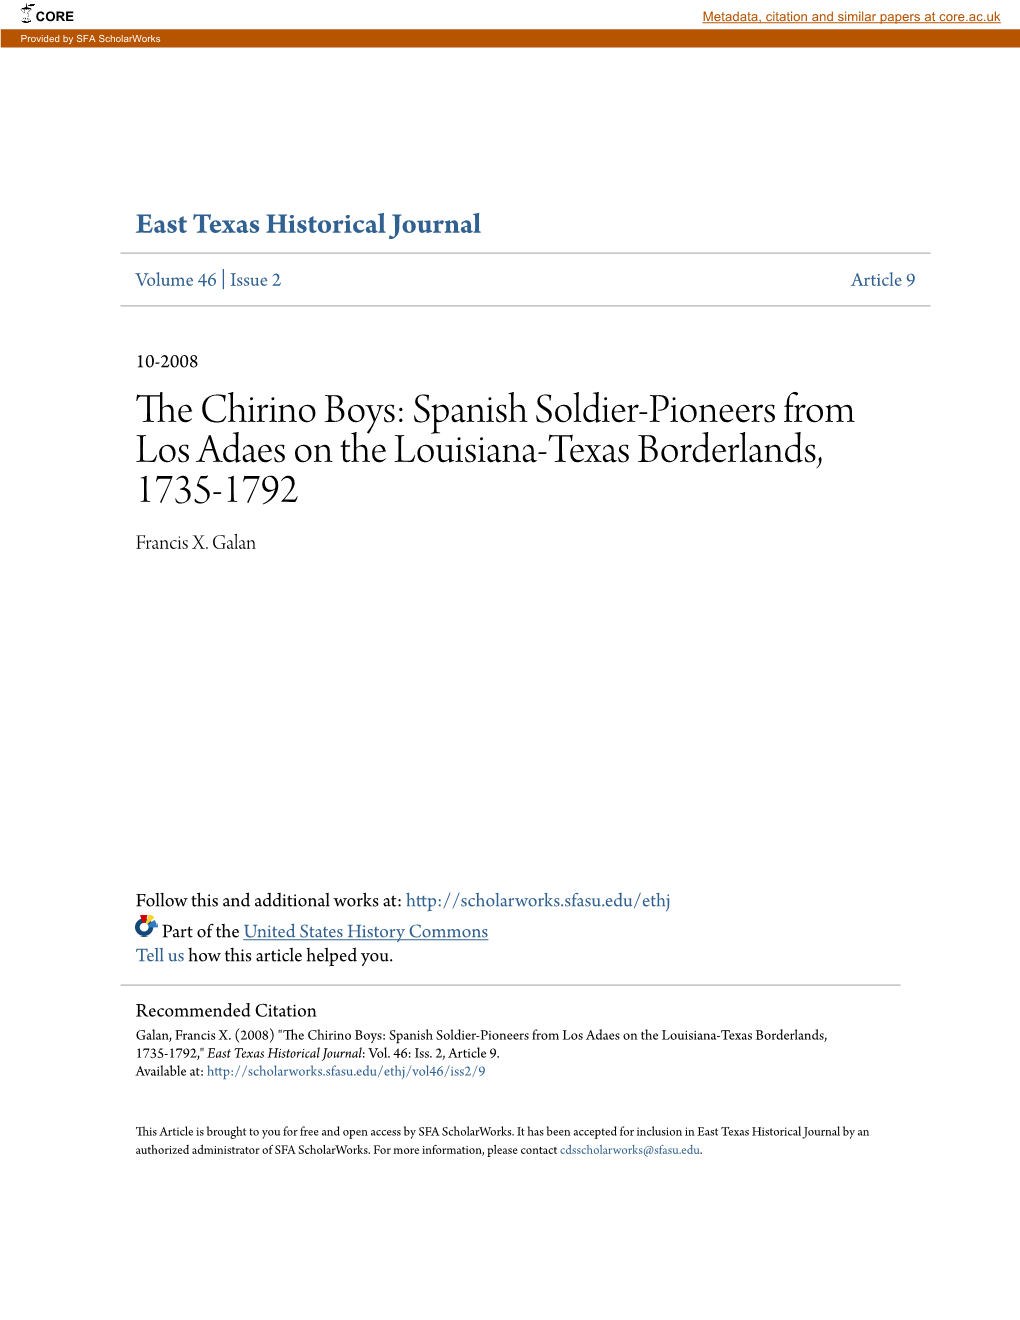 The Chirino Boys: Spanish Soldier-Pioneers from Los Adaes on the Louisiana·Texas Borderlands, 1735-1792